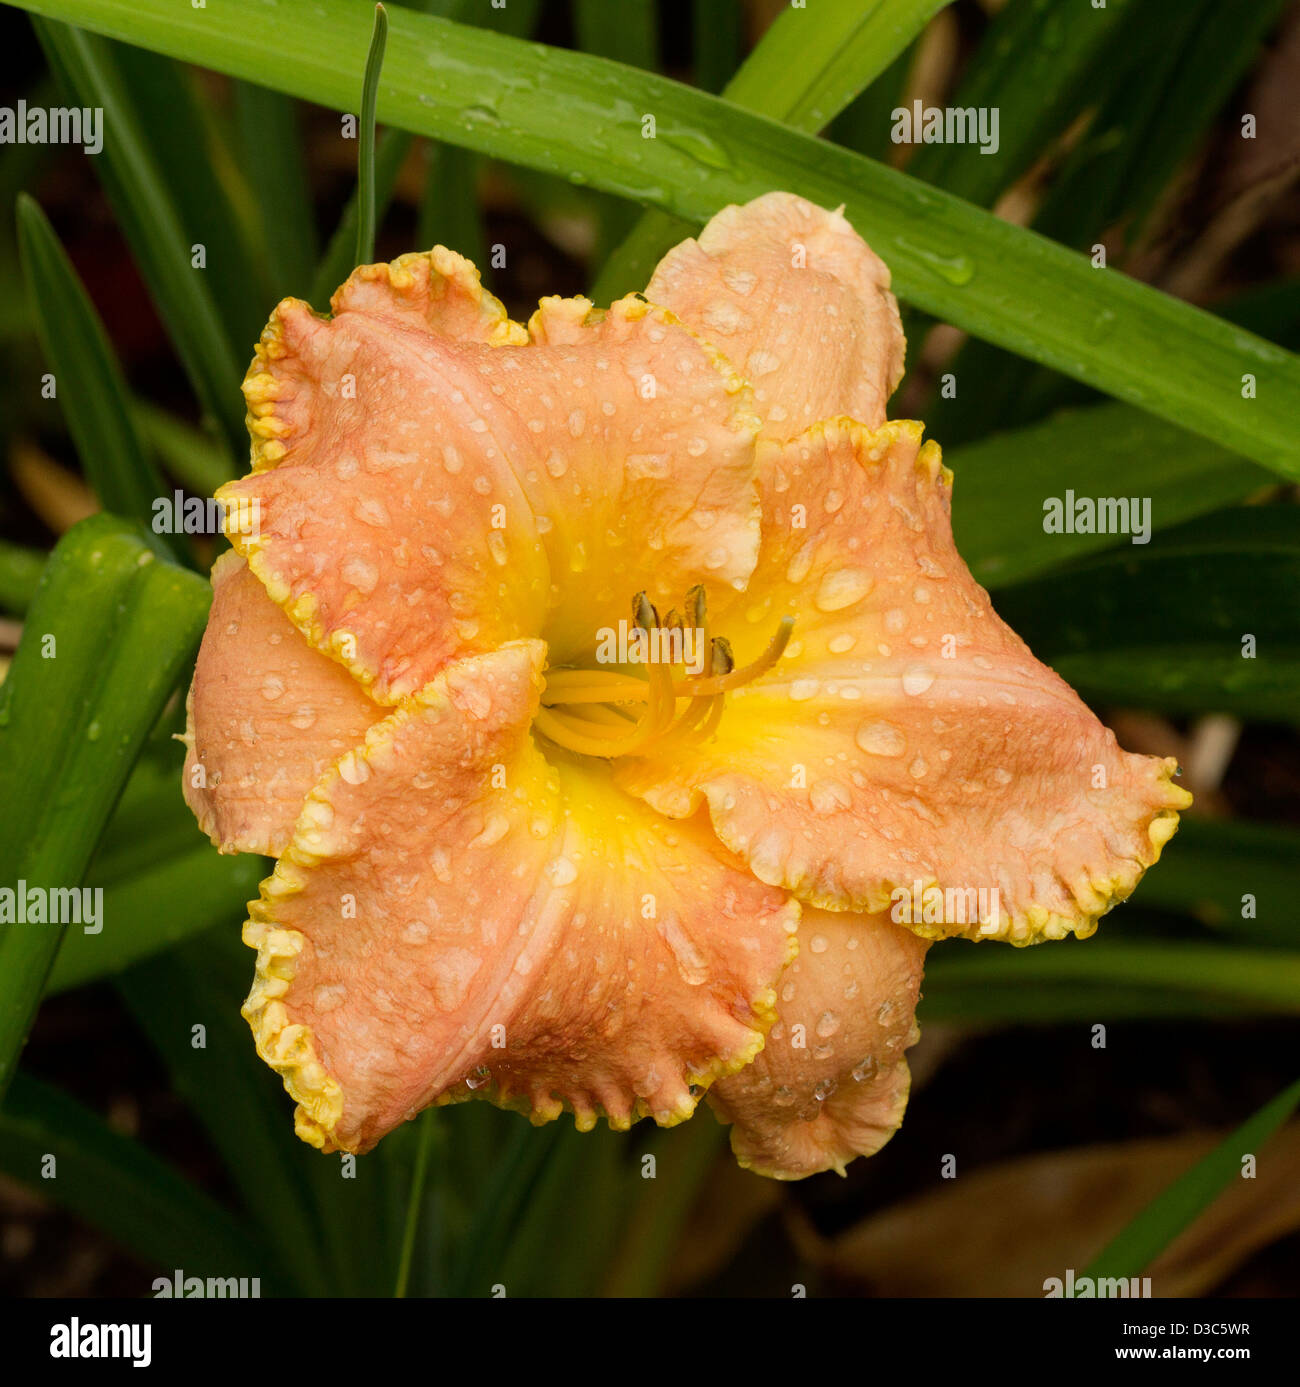 Spectacular orange flower of daylily - Hemerocallis 'Rushing Delight' - with raindrops on yellow edged frilly petals and foliage Stock Photo